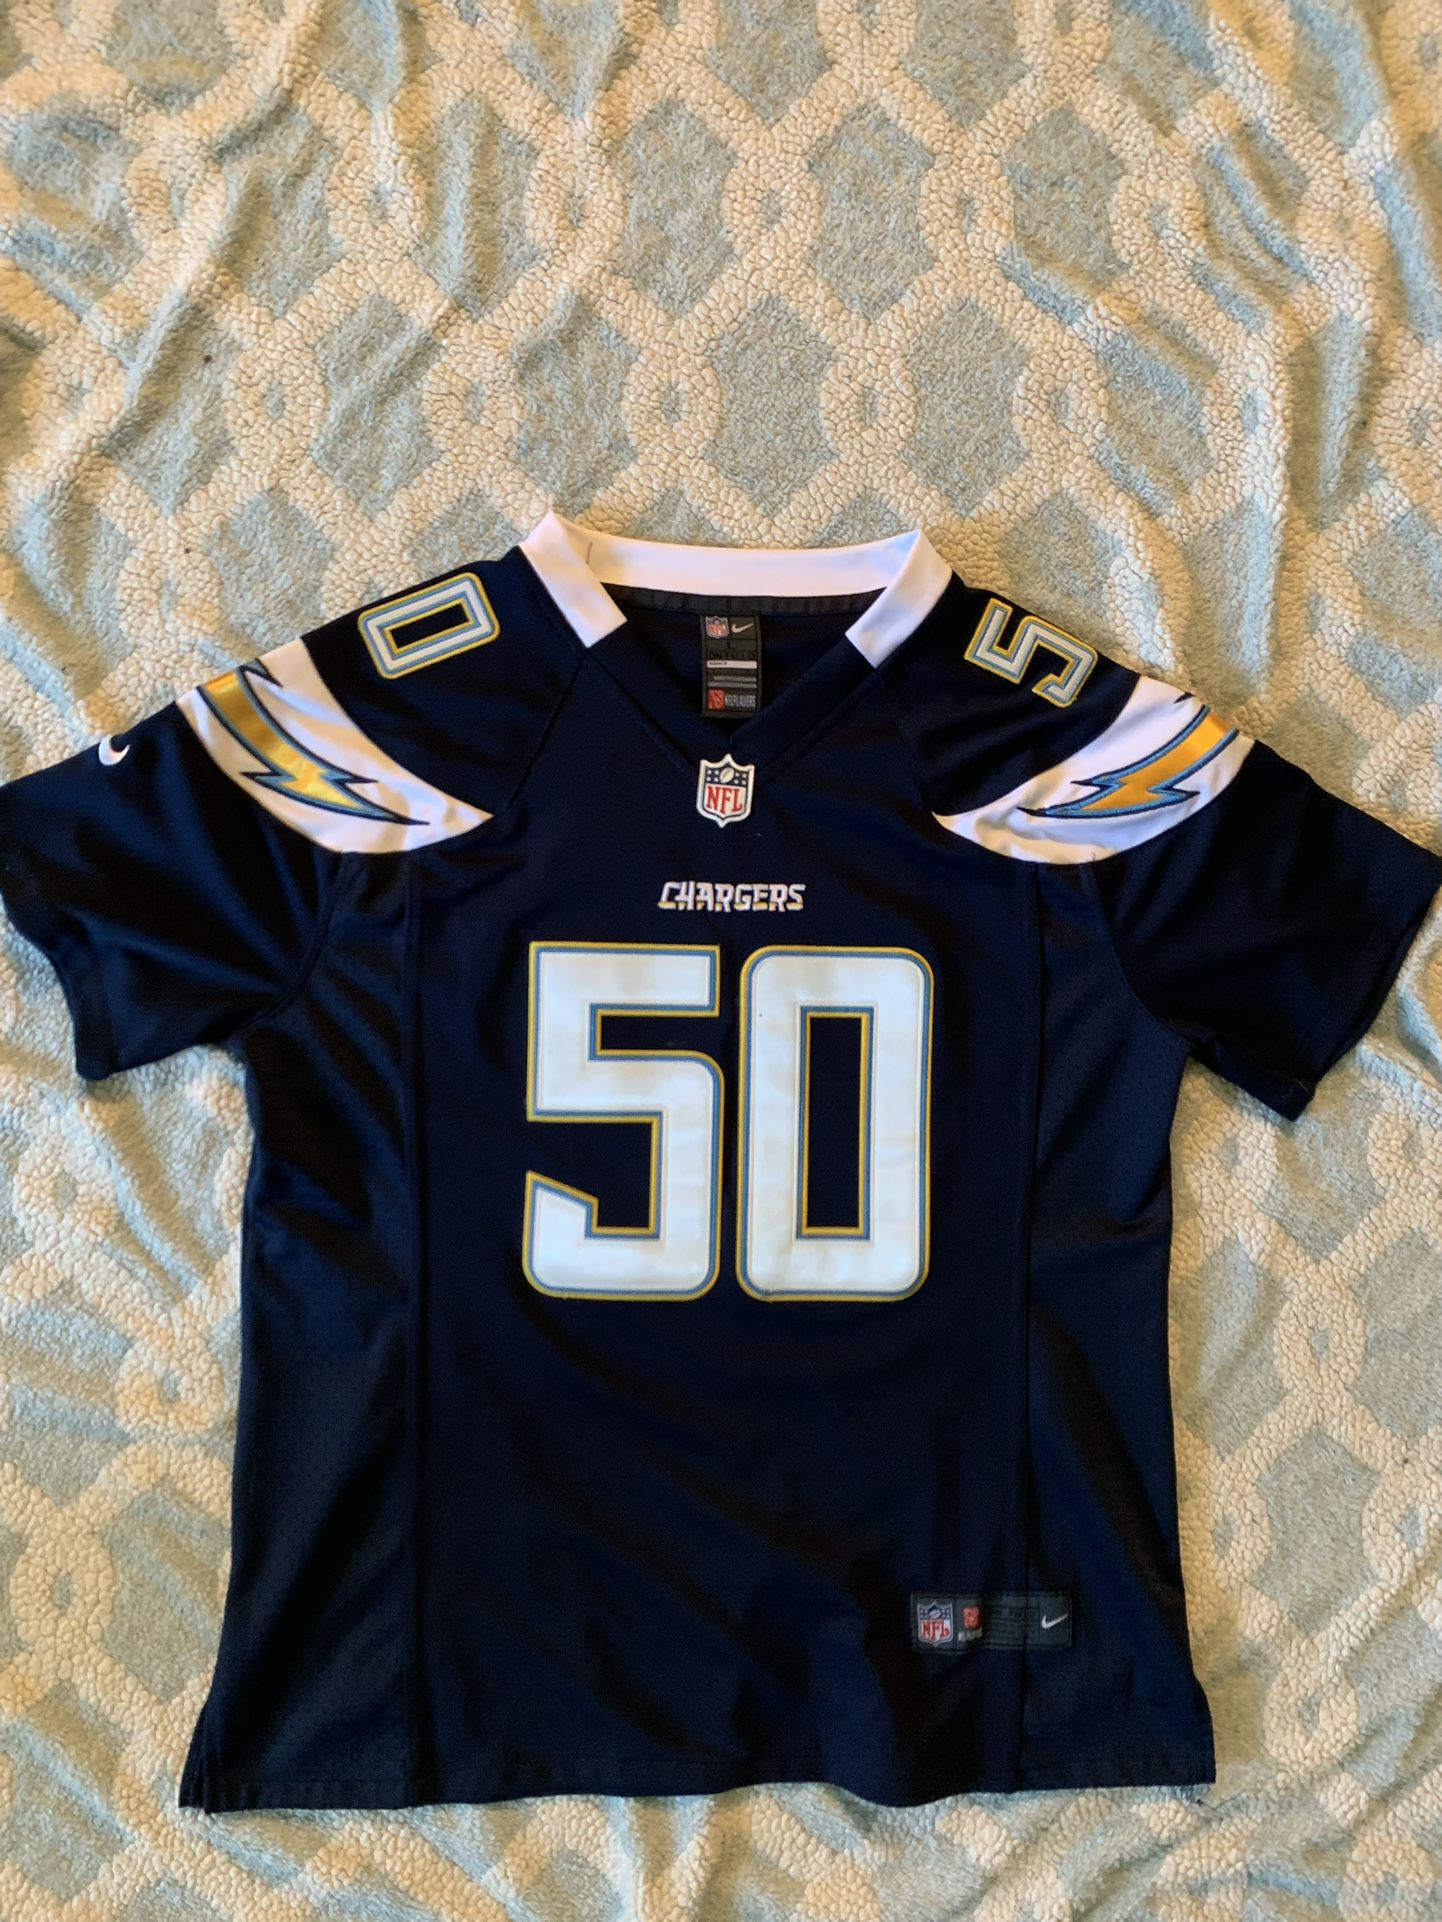 *Worn Once* Retro Te’o Chargers NFL Jersey 50’ Basically New Chargers Jersey ❗️